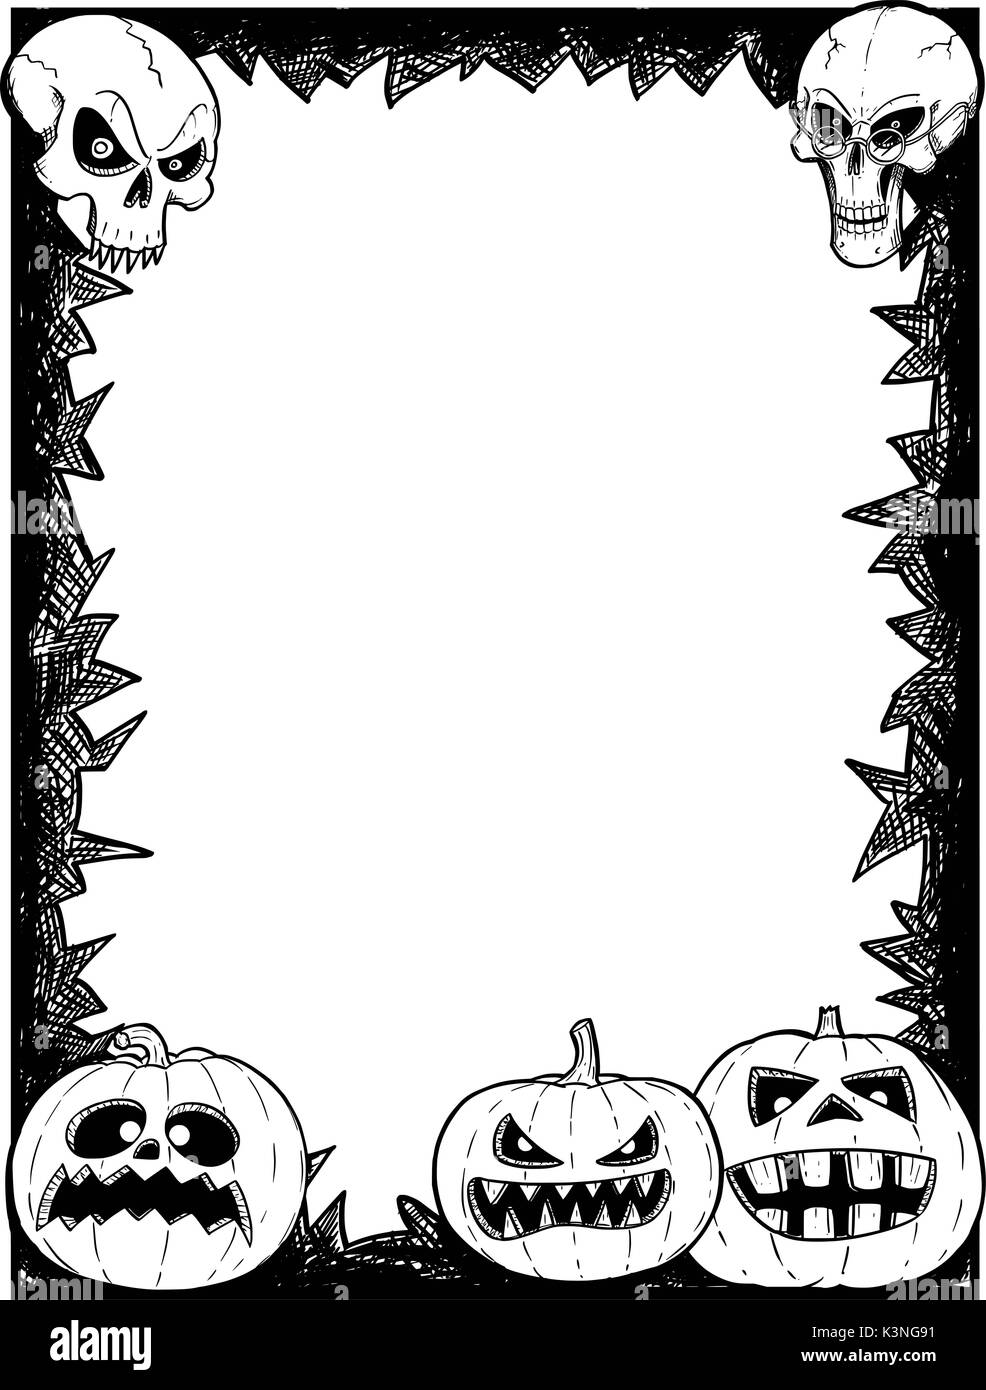 Hand drawing cartoon Halloween frame with skull and pumpkin illustrations. Stock Vector